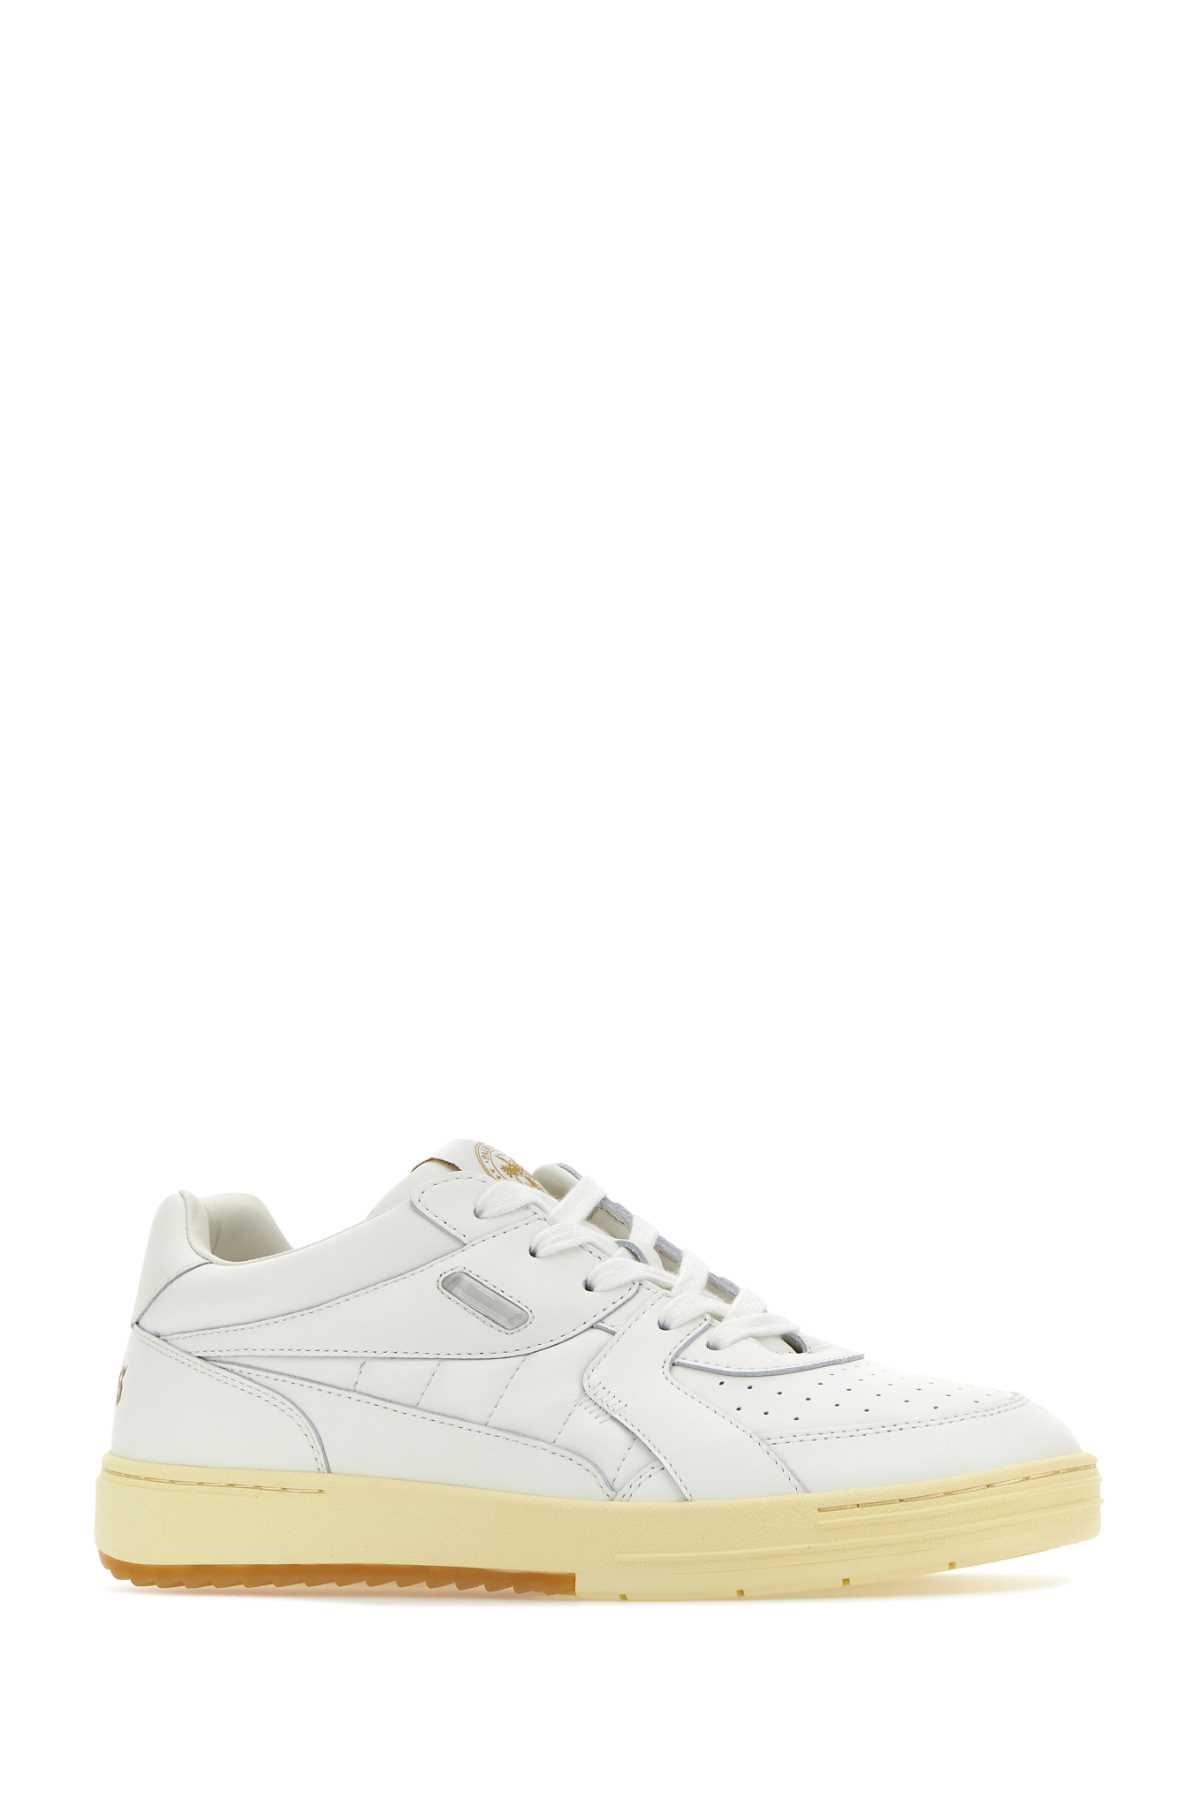 PALM ANGELS WHITE LEATHER UNIVERSITY SNEAKERS